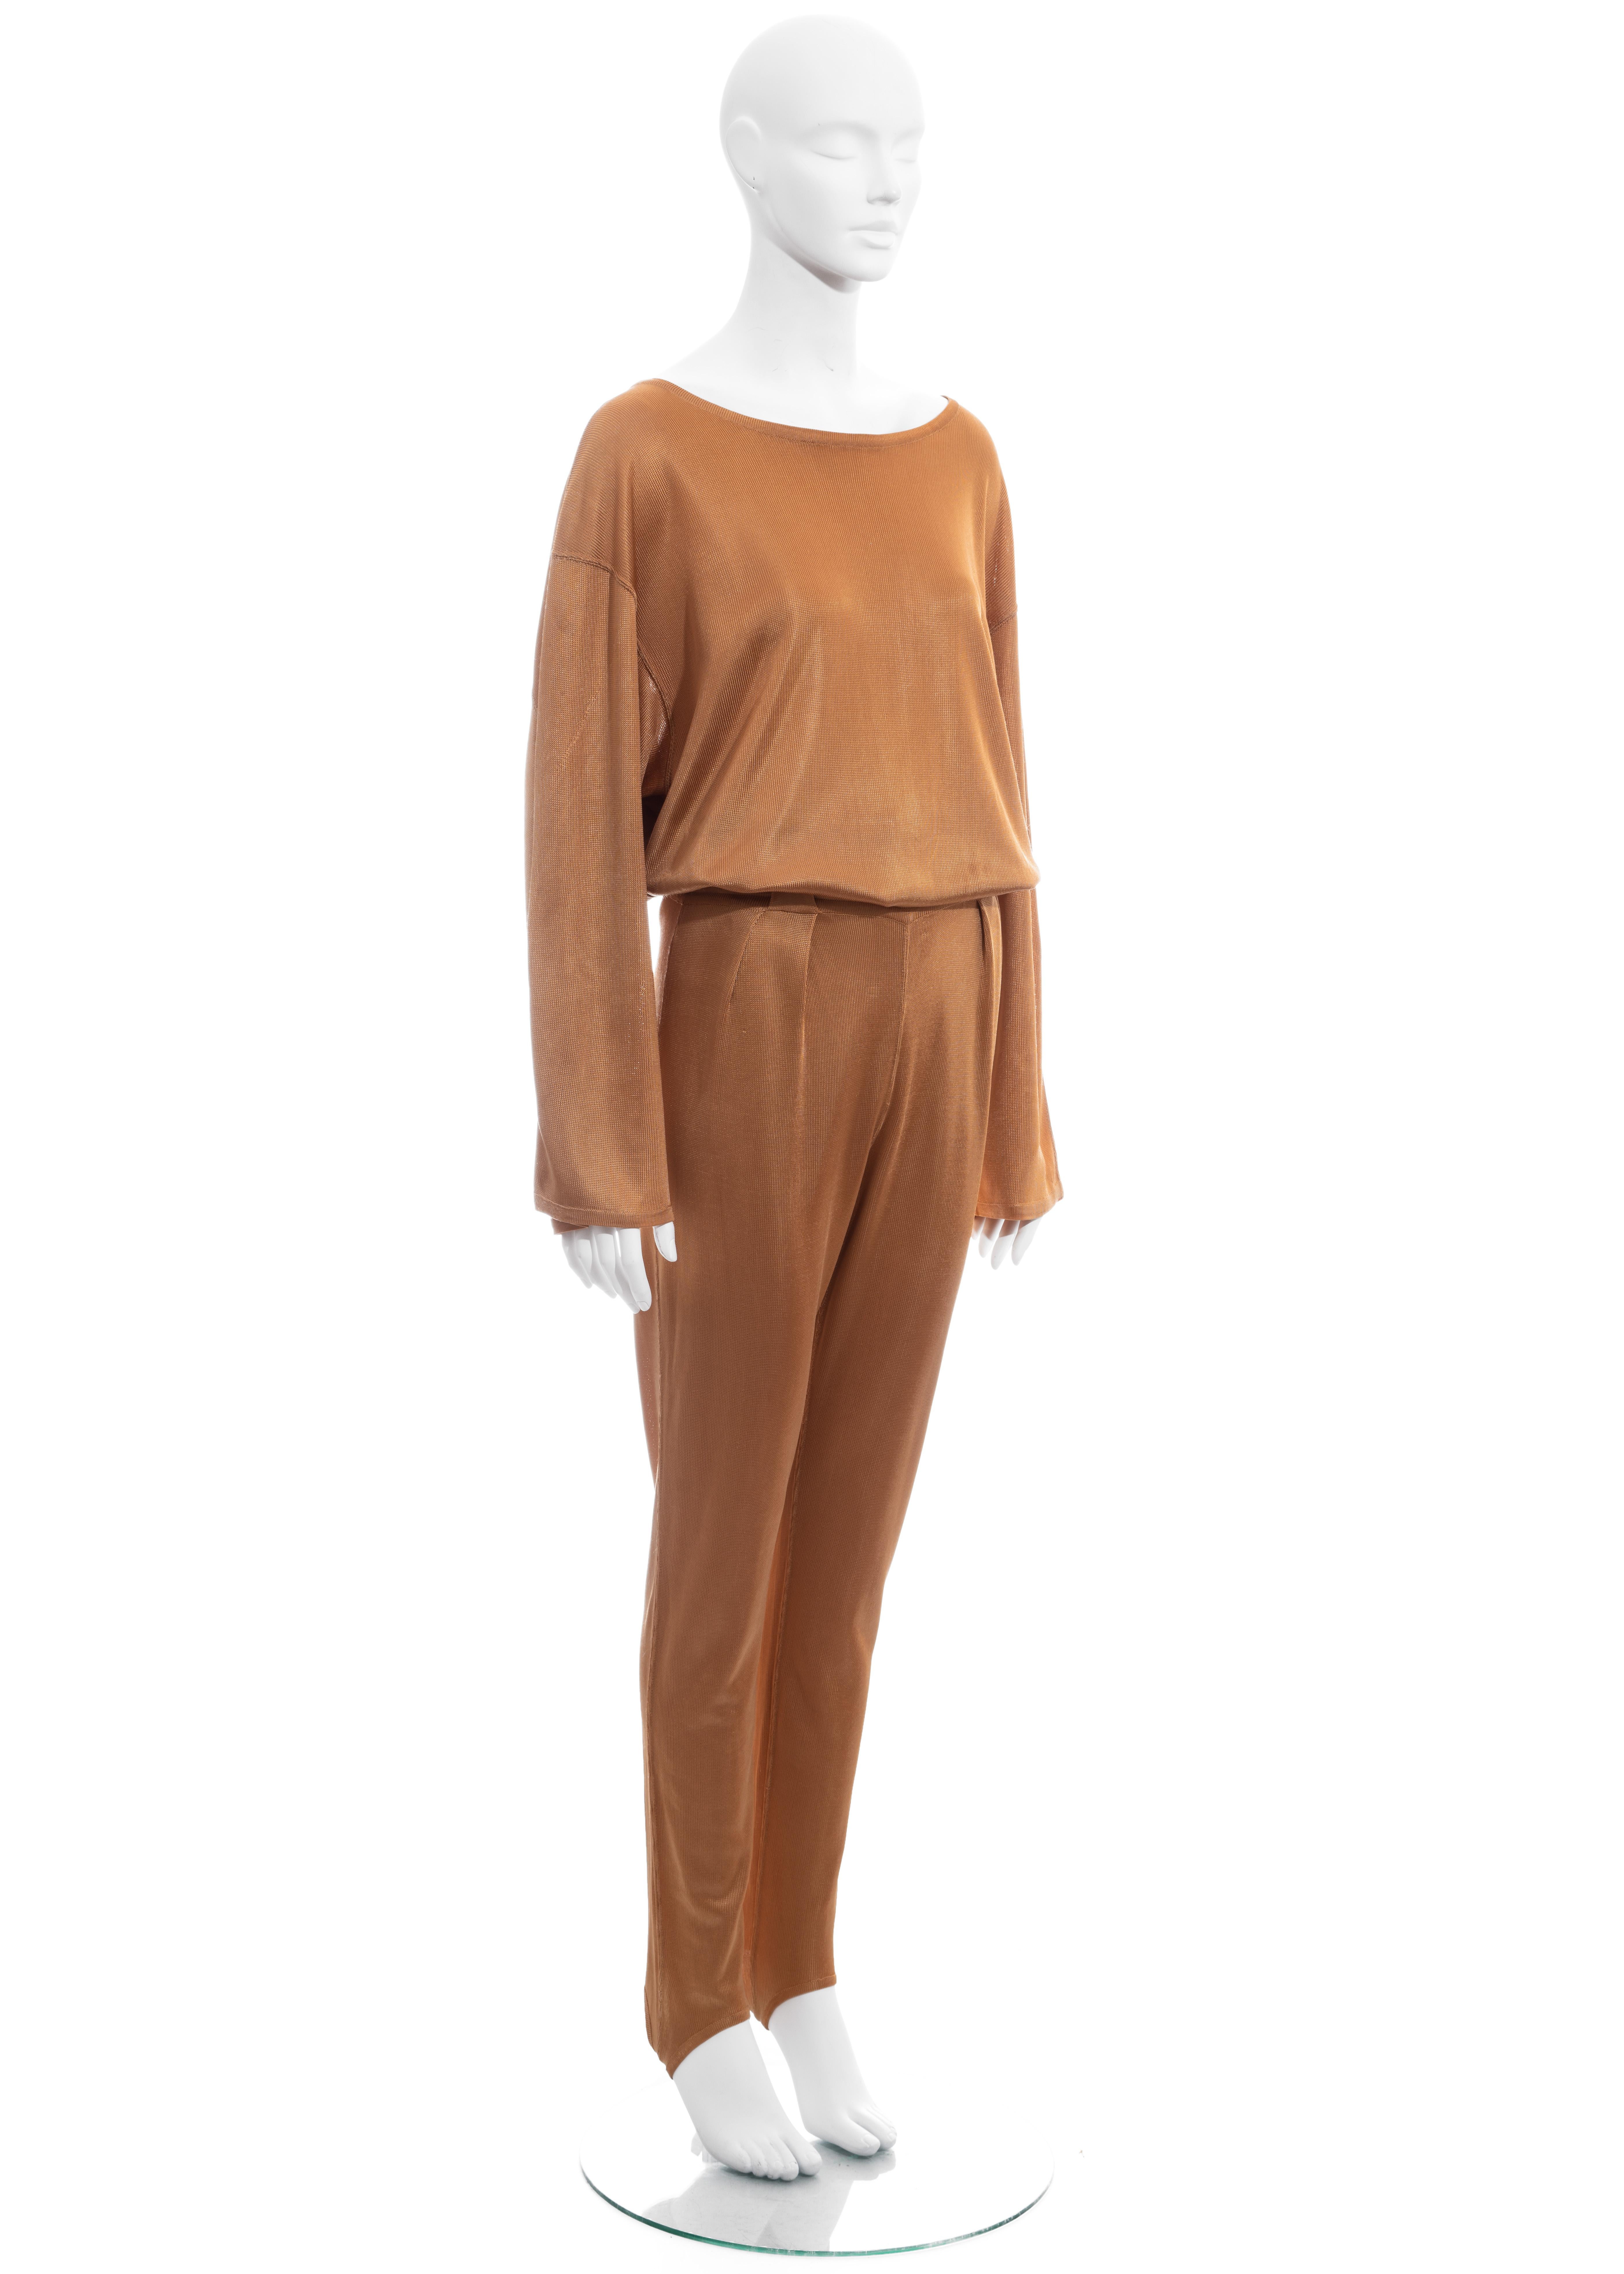 ▪ Azzedine apricot knitted pant suit 
▪ 100% Acetate 
▪ Loose cut sweater with wide sleeve
▪ High waisted pants with stirrups 
▪ Size Medium
▪ Fall-Winter 1985